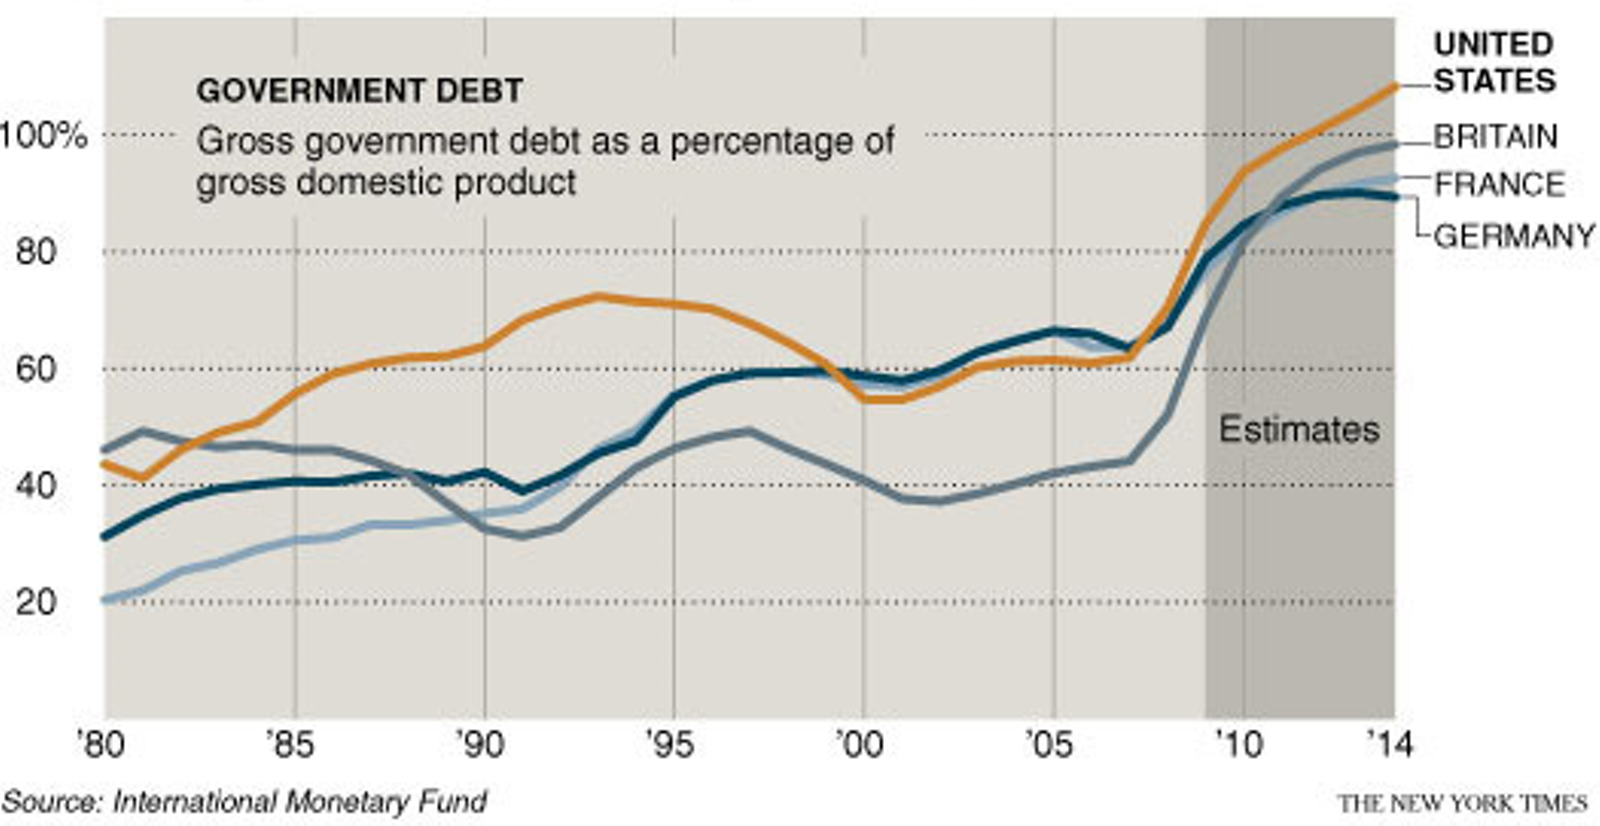 http://einarbb.blog.is/users/72/einarbb/img/government_debt.png